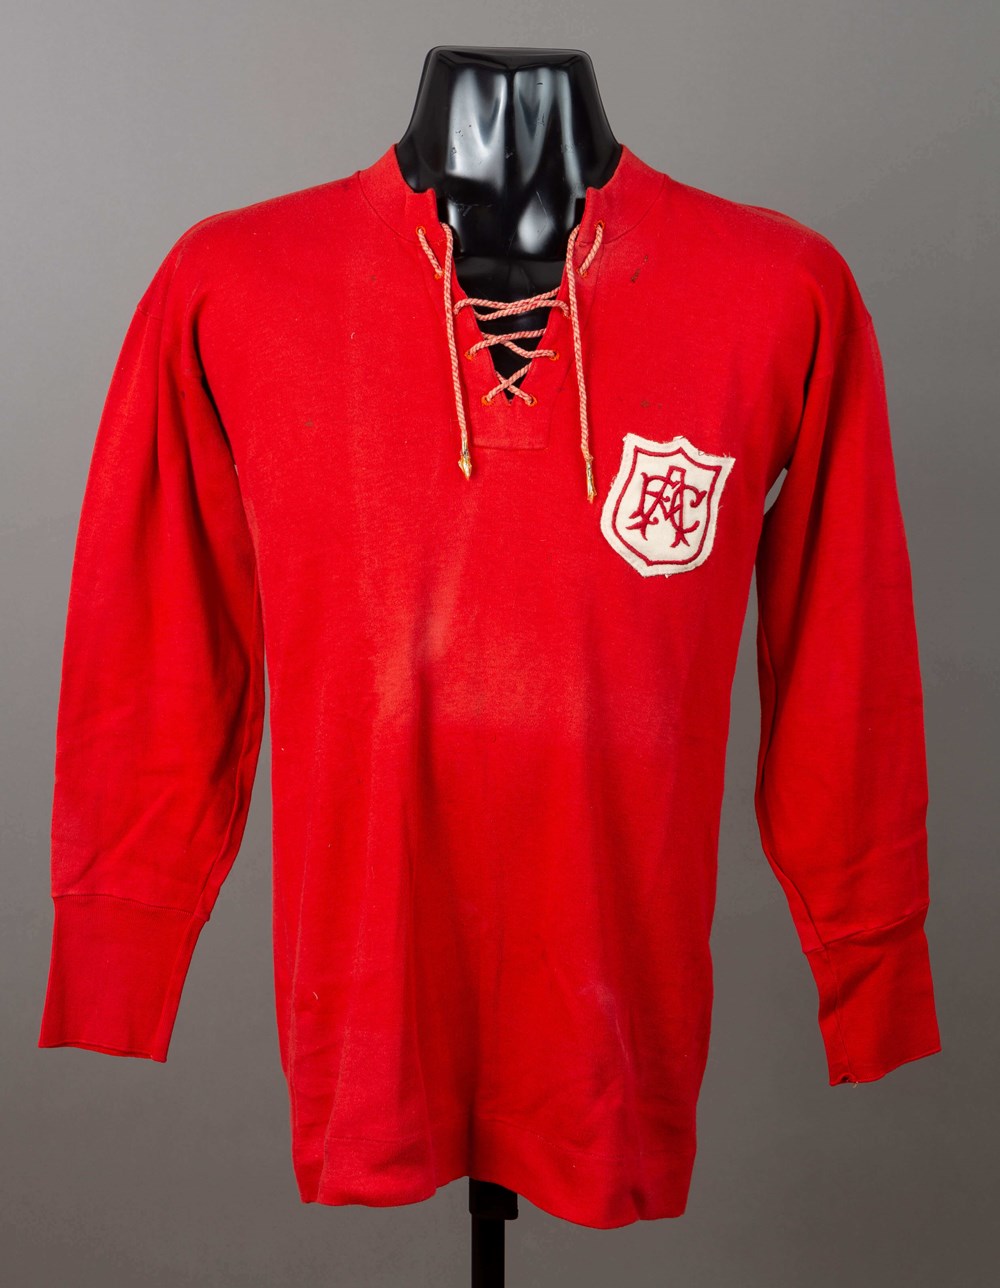 Alf Baker's match-worn red Arsenal jersey from the 1927 F.A. Cup Final